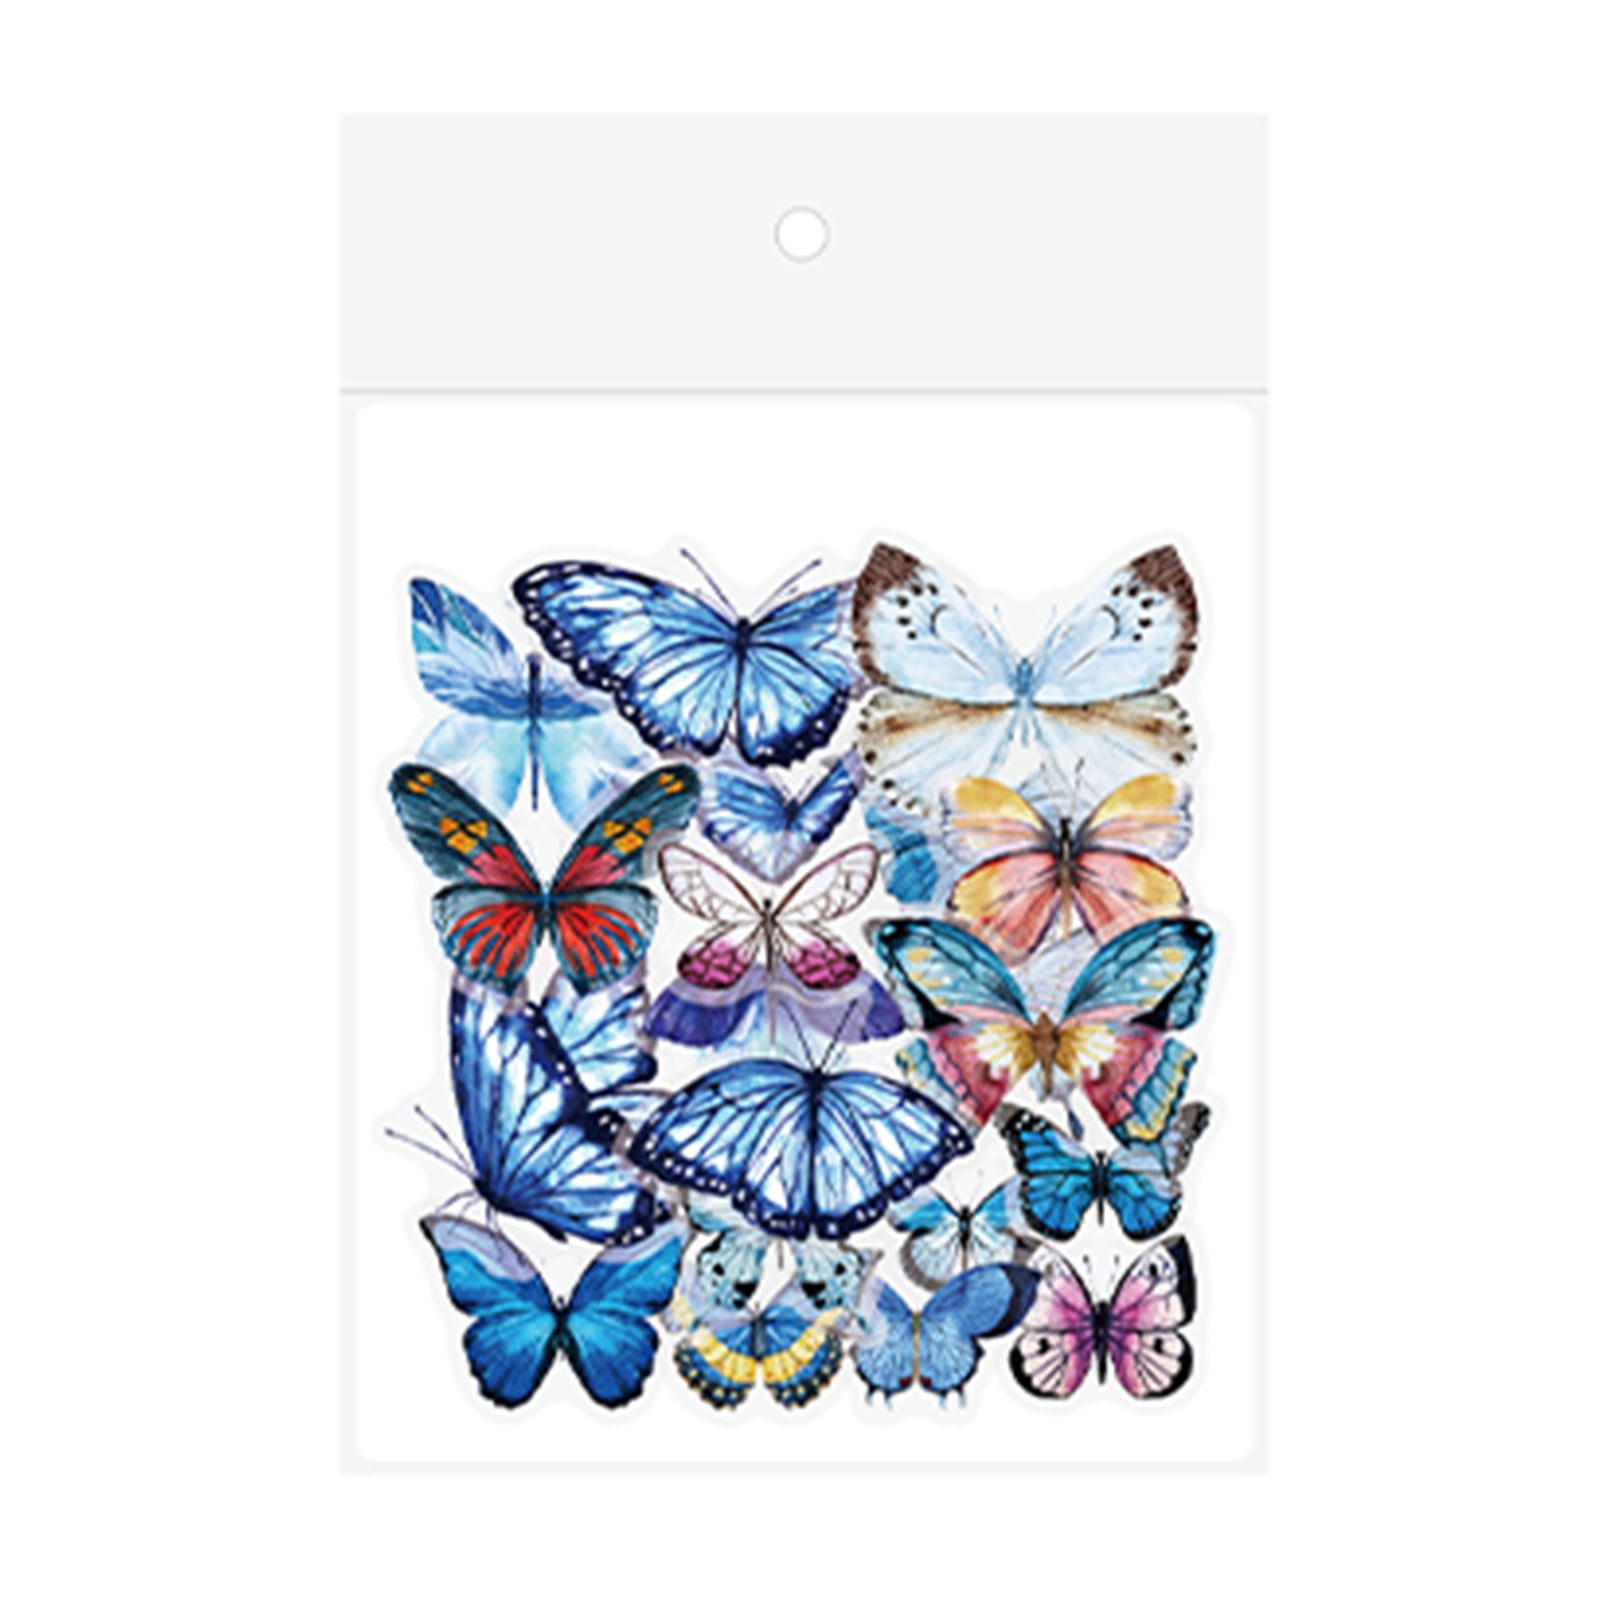  240 Pieces Butterfly Stickers PET Waterproof Transparent  Decorative Decals for Scrapbook Bullet Journal Planners Cards Envelopes  Water Bottles Resin DIY Crafts